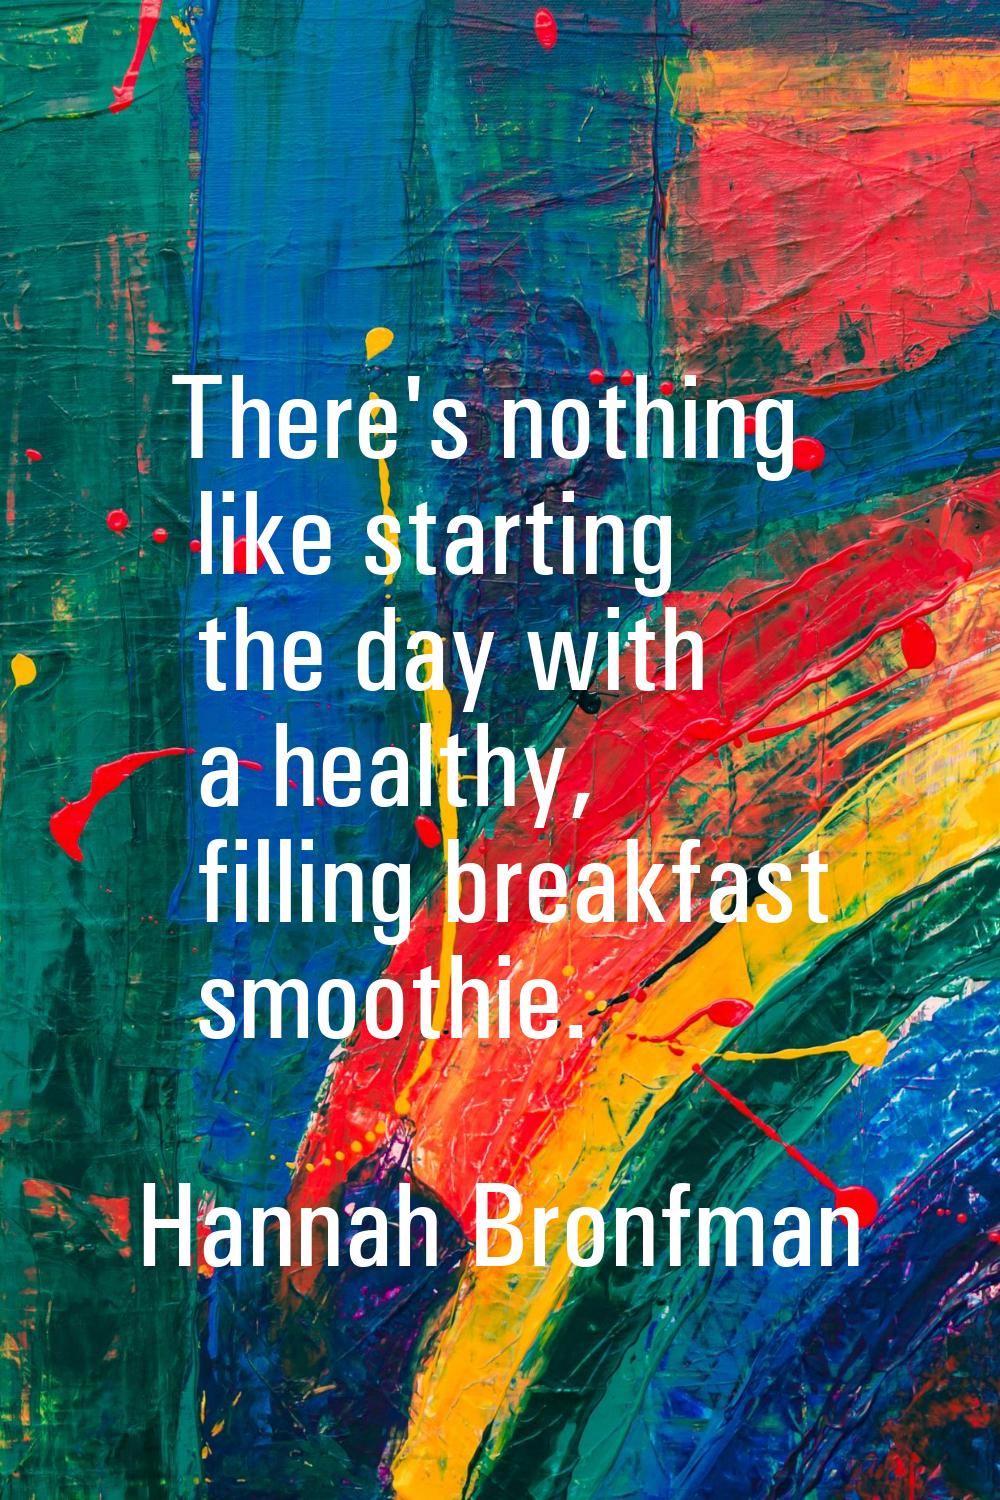 There's nothing like starting the day with a healthy, filling breakfast smoothie.